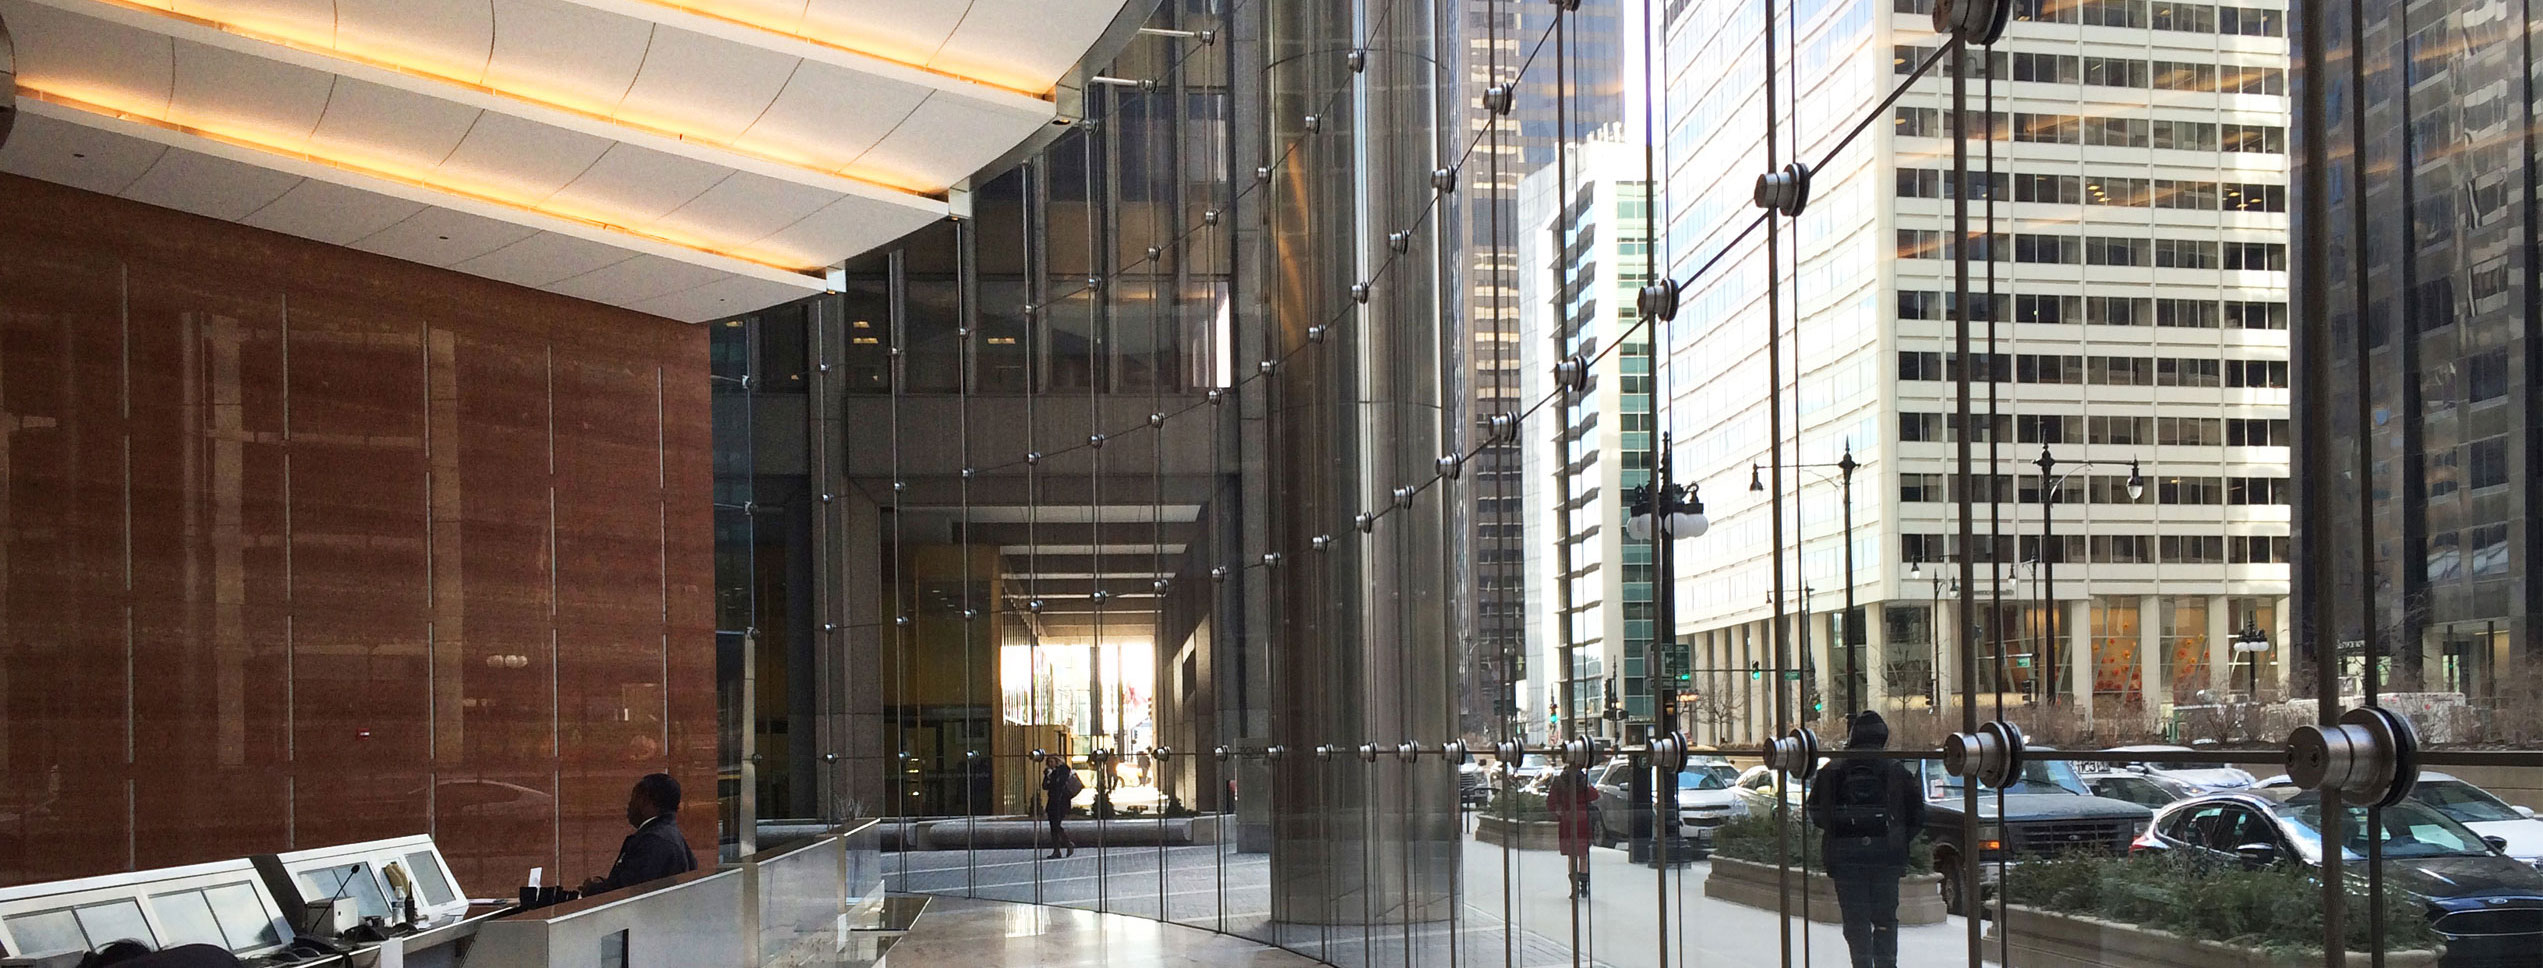 111 S Wacker office building lobby and glass wall